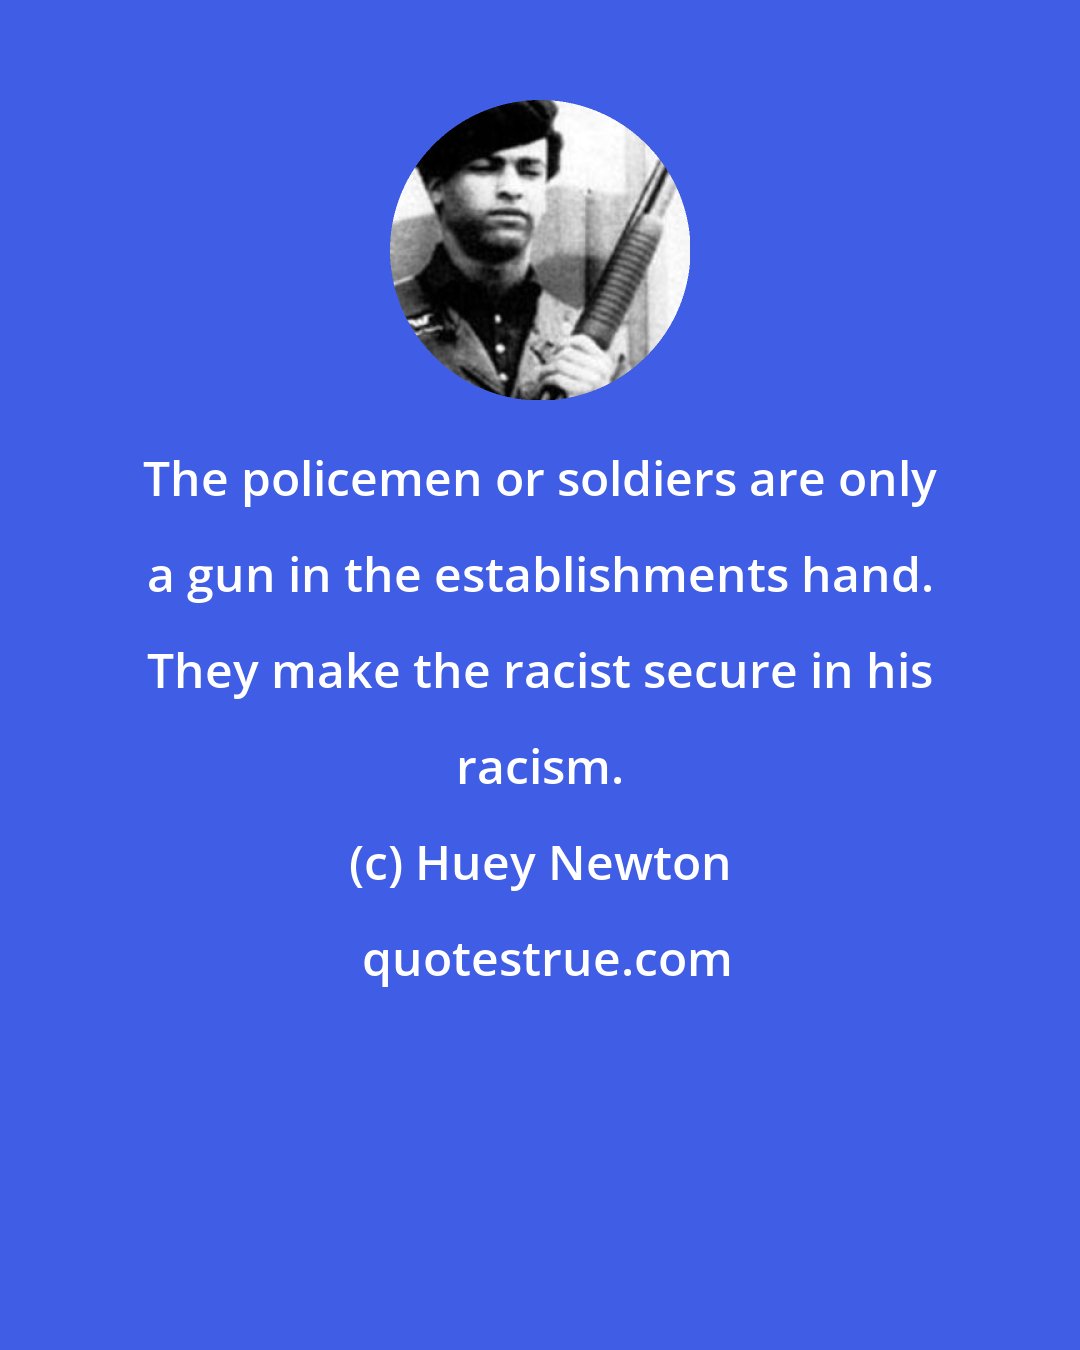 Huey Newton: The policemen or soldiers are only a gun in the establishments hand. They make the racist secure in his racism.